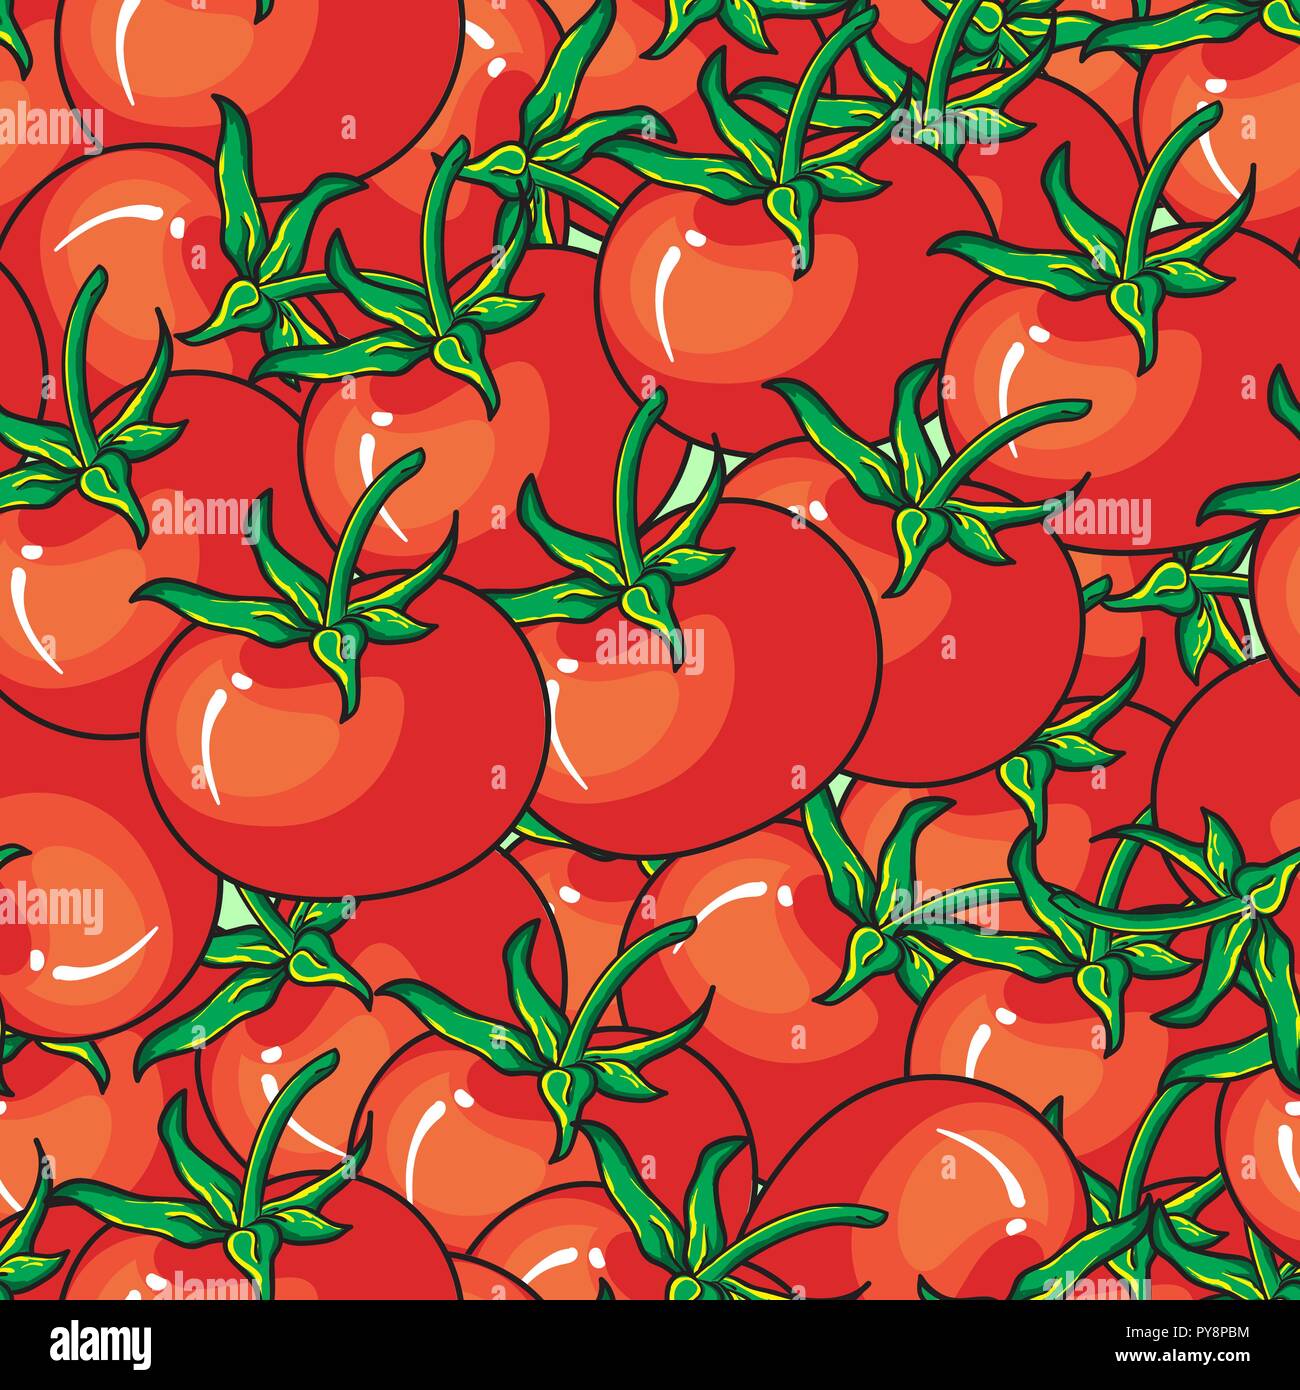 Red tomato seamless pattern on red background perfect for wallpaper, texture, fabric, textile, and surface design. Hand drawn vector illustration. Stock Vector